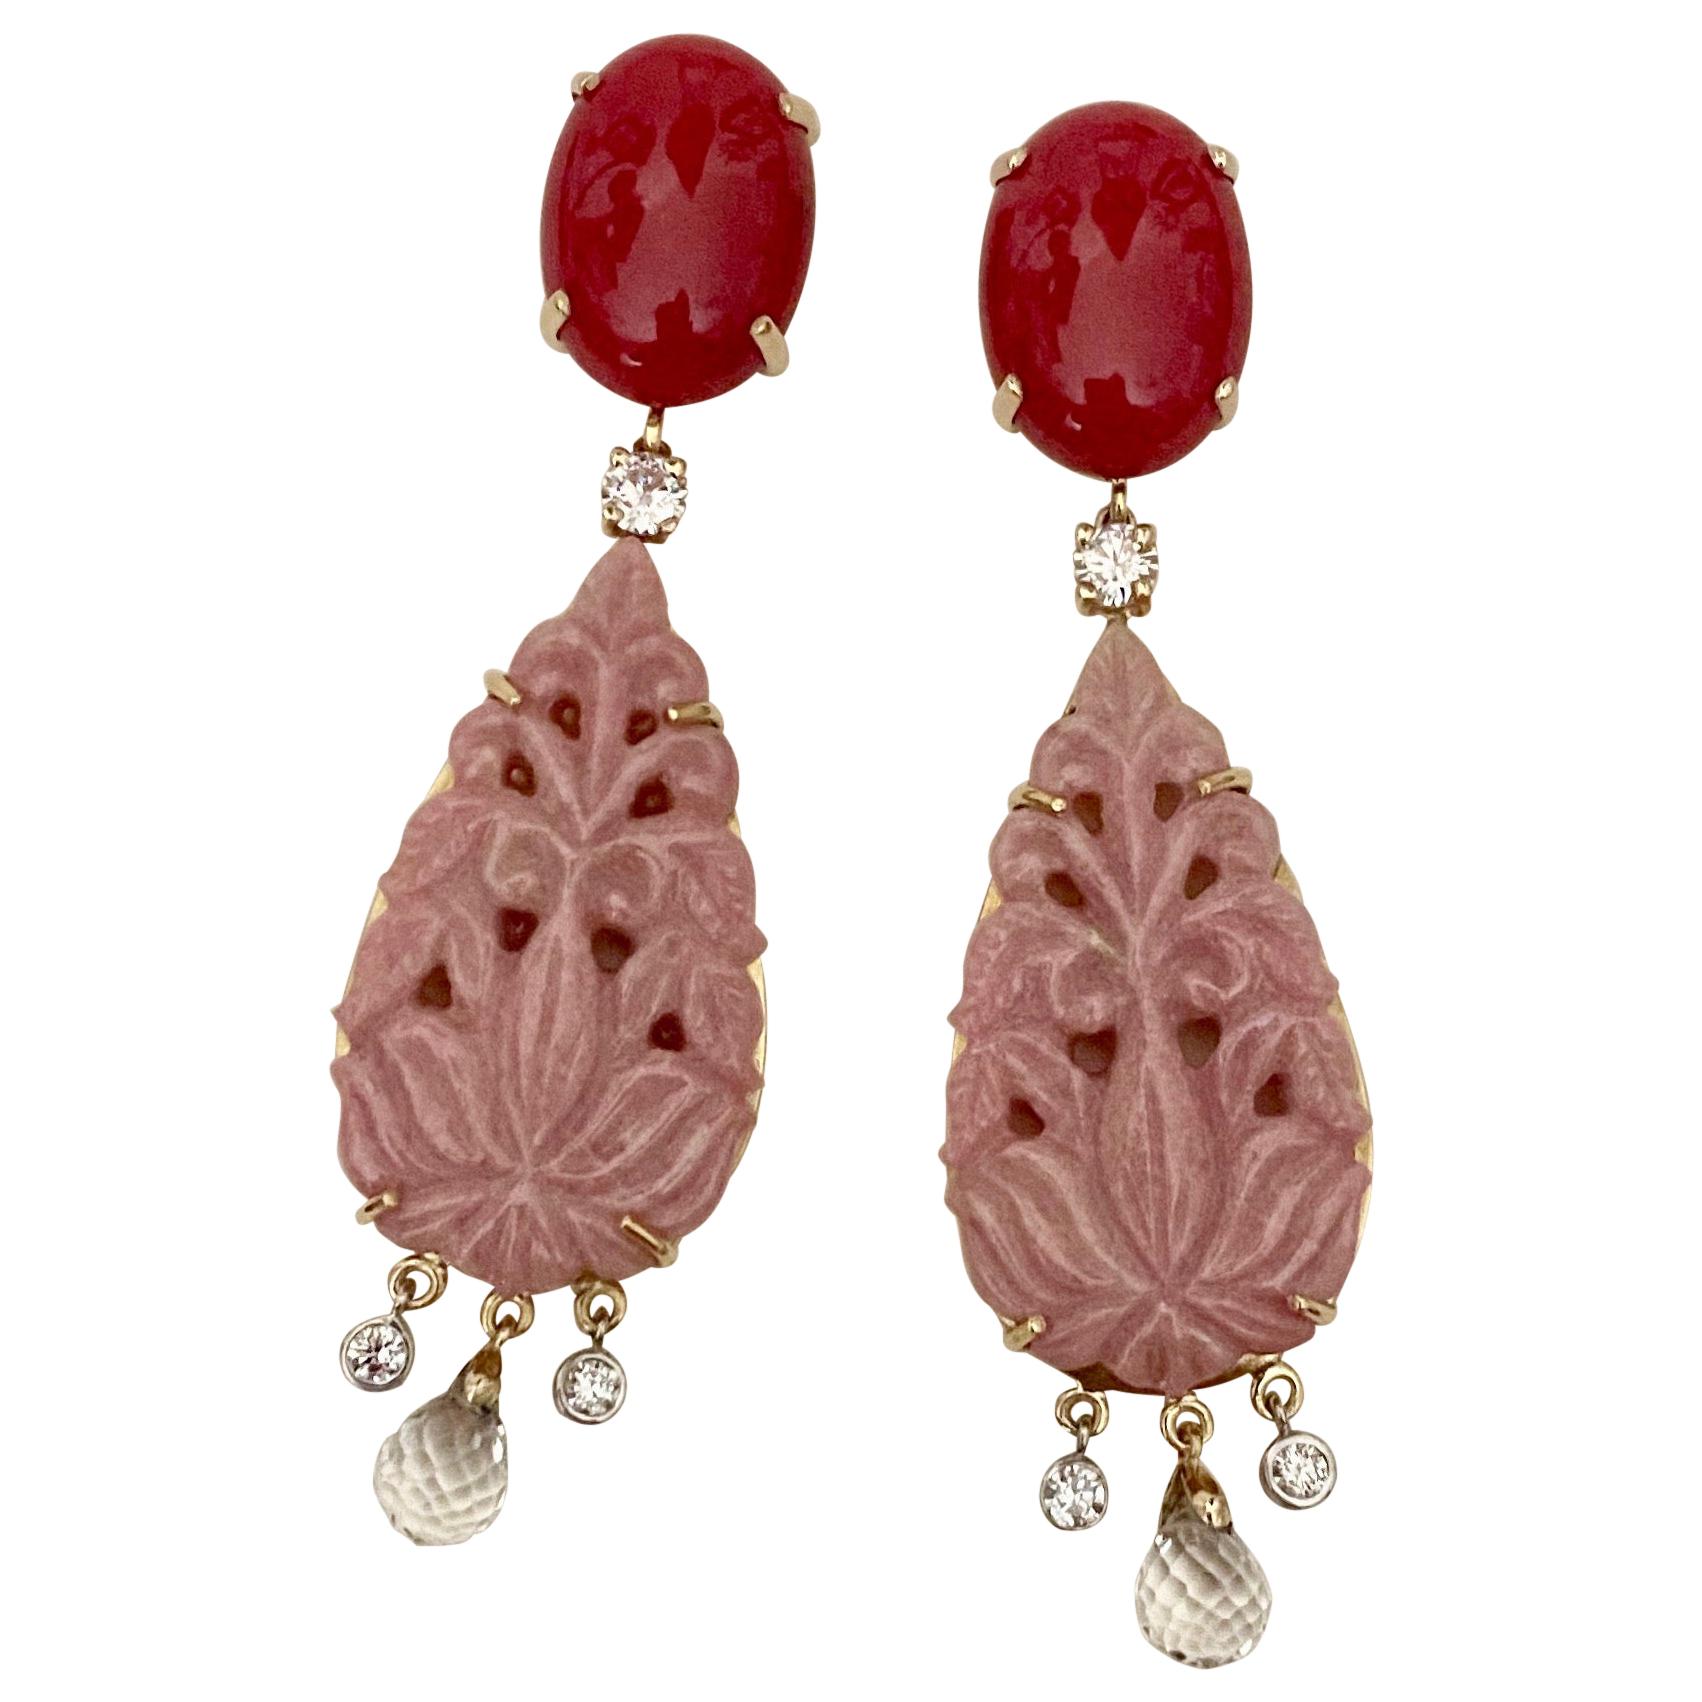 Pink rosaline (origin: Norway) is complemented by red coral (origin: the Mediterranean Sea) in these exotic dangle earrings.  Rosaline is a crystalline, manganese-bearing variety of the mineral zoisite.  These perfectly matched drops are expertly